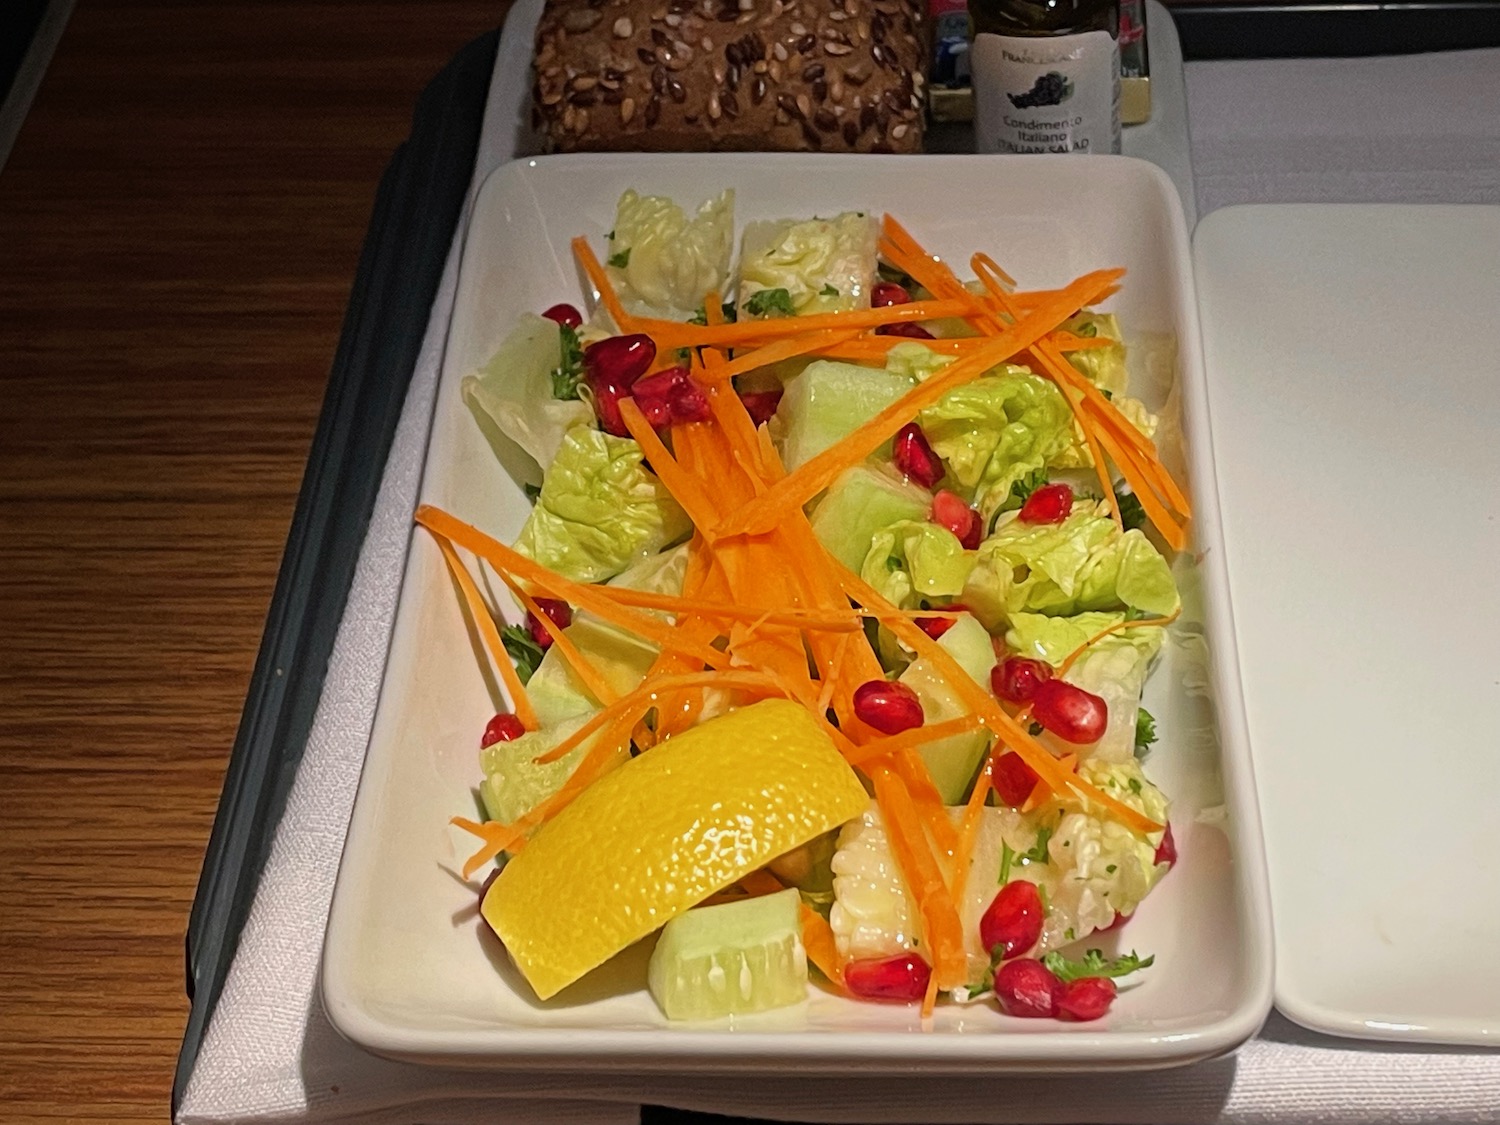 a plate of salad with carrots and a lemon